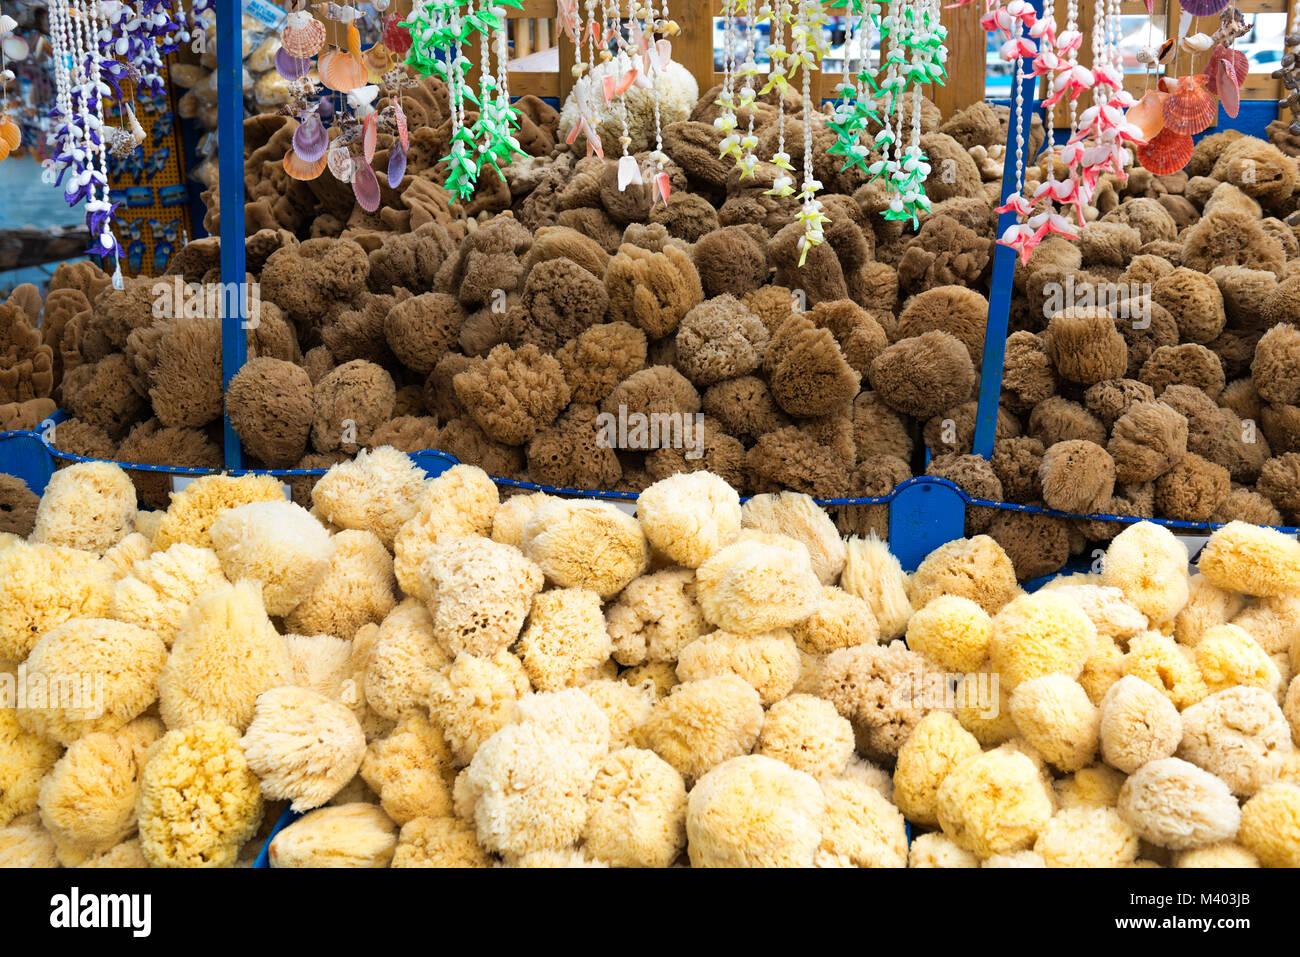 Natural marine sponges exposed in a street market, Rhodes Island, Greece. Stock Photo